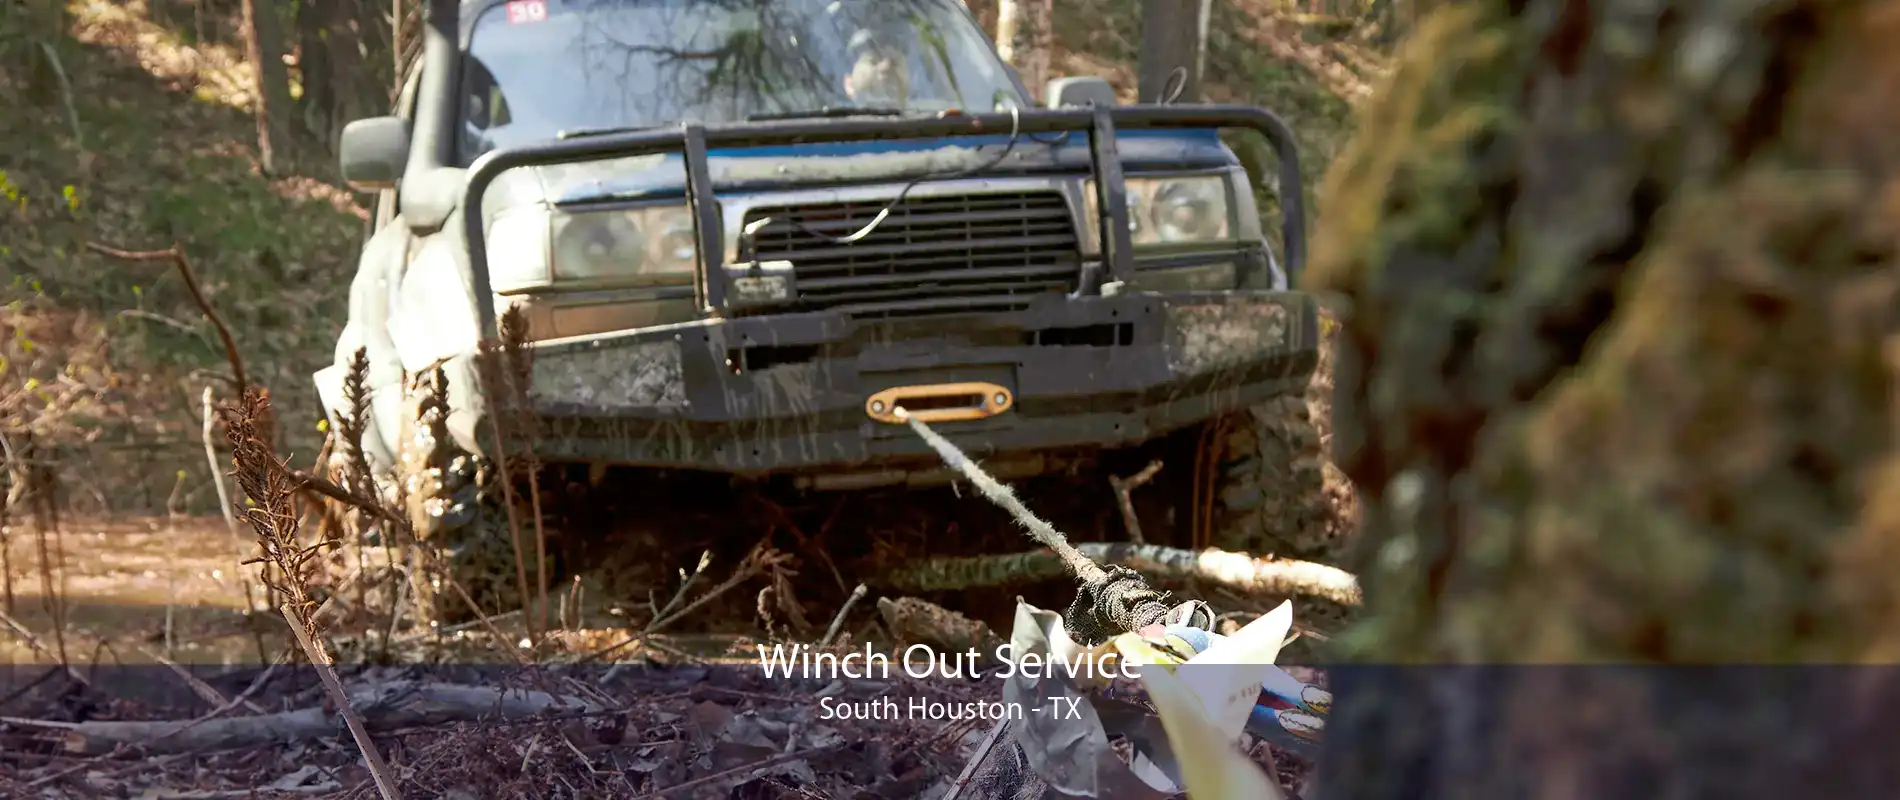 Winch Out Service South Houston - TX